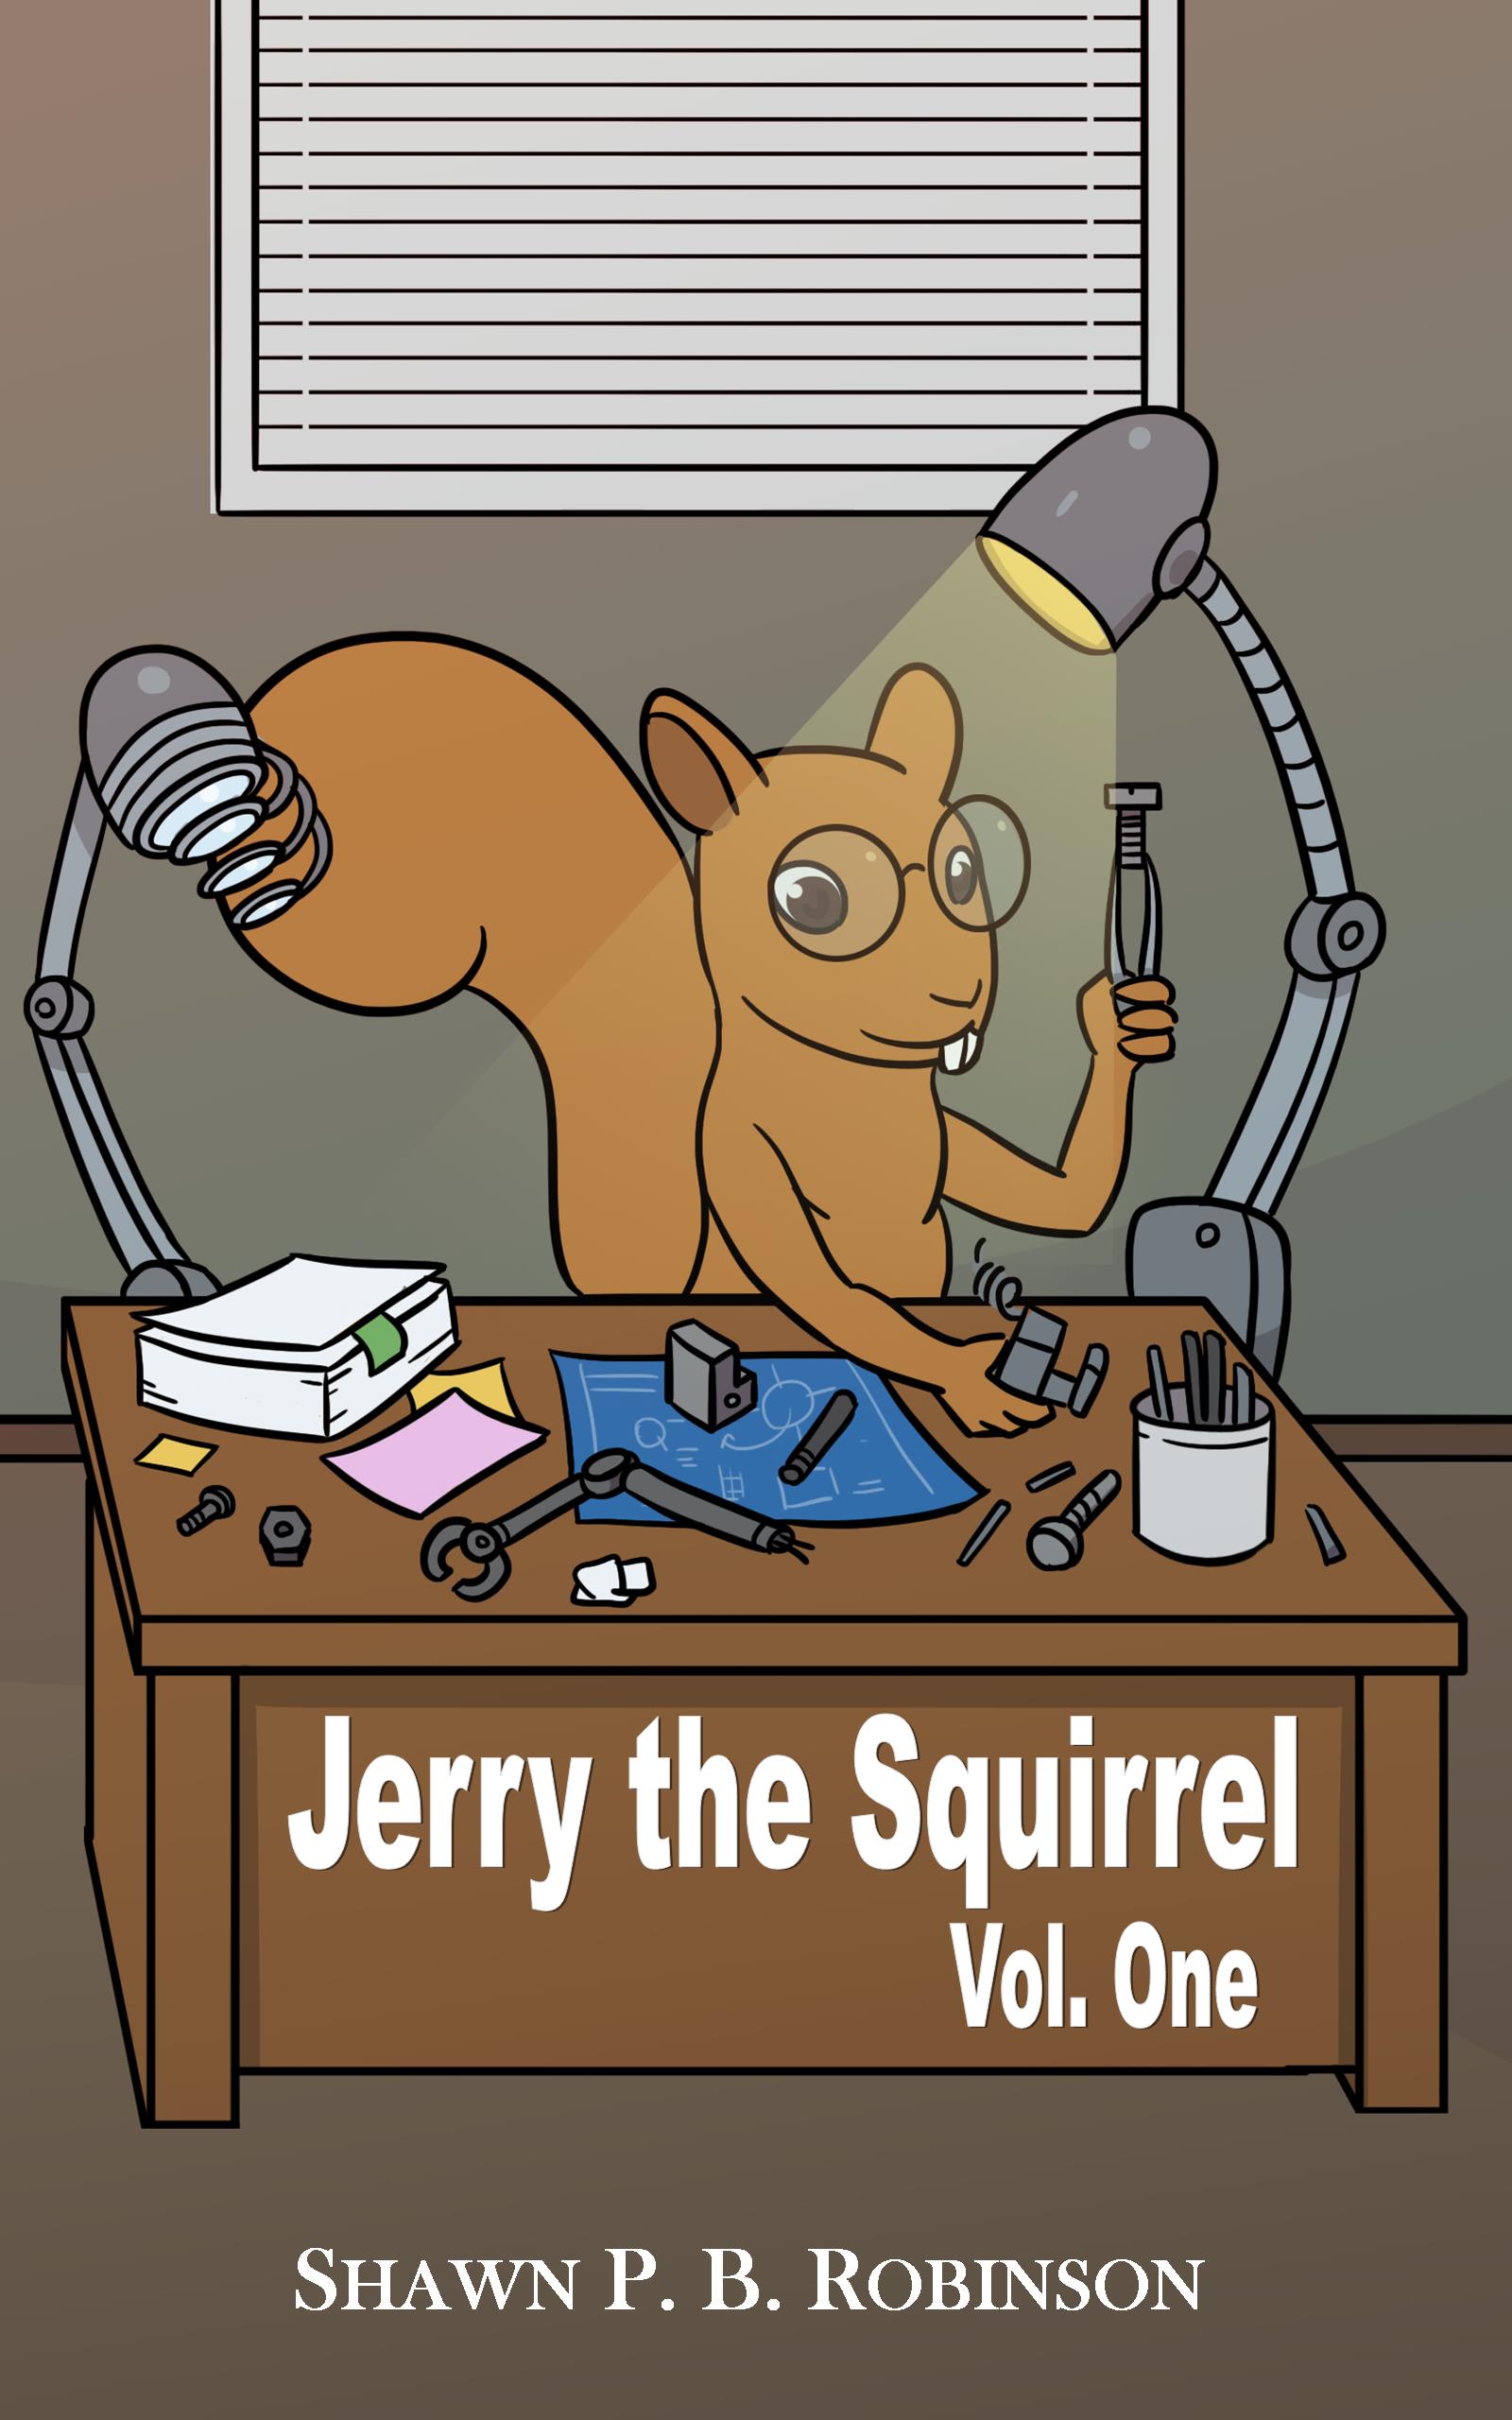 FREE: Jerry the Squirrel: Volume One by Shawn P. B. Robinson